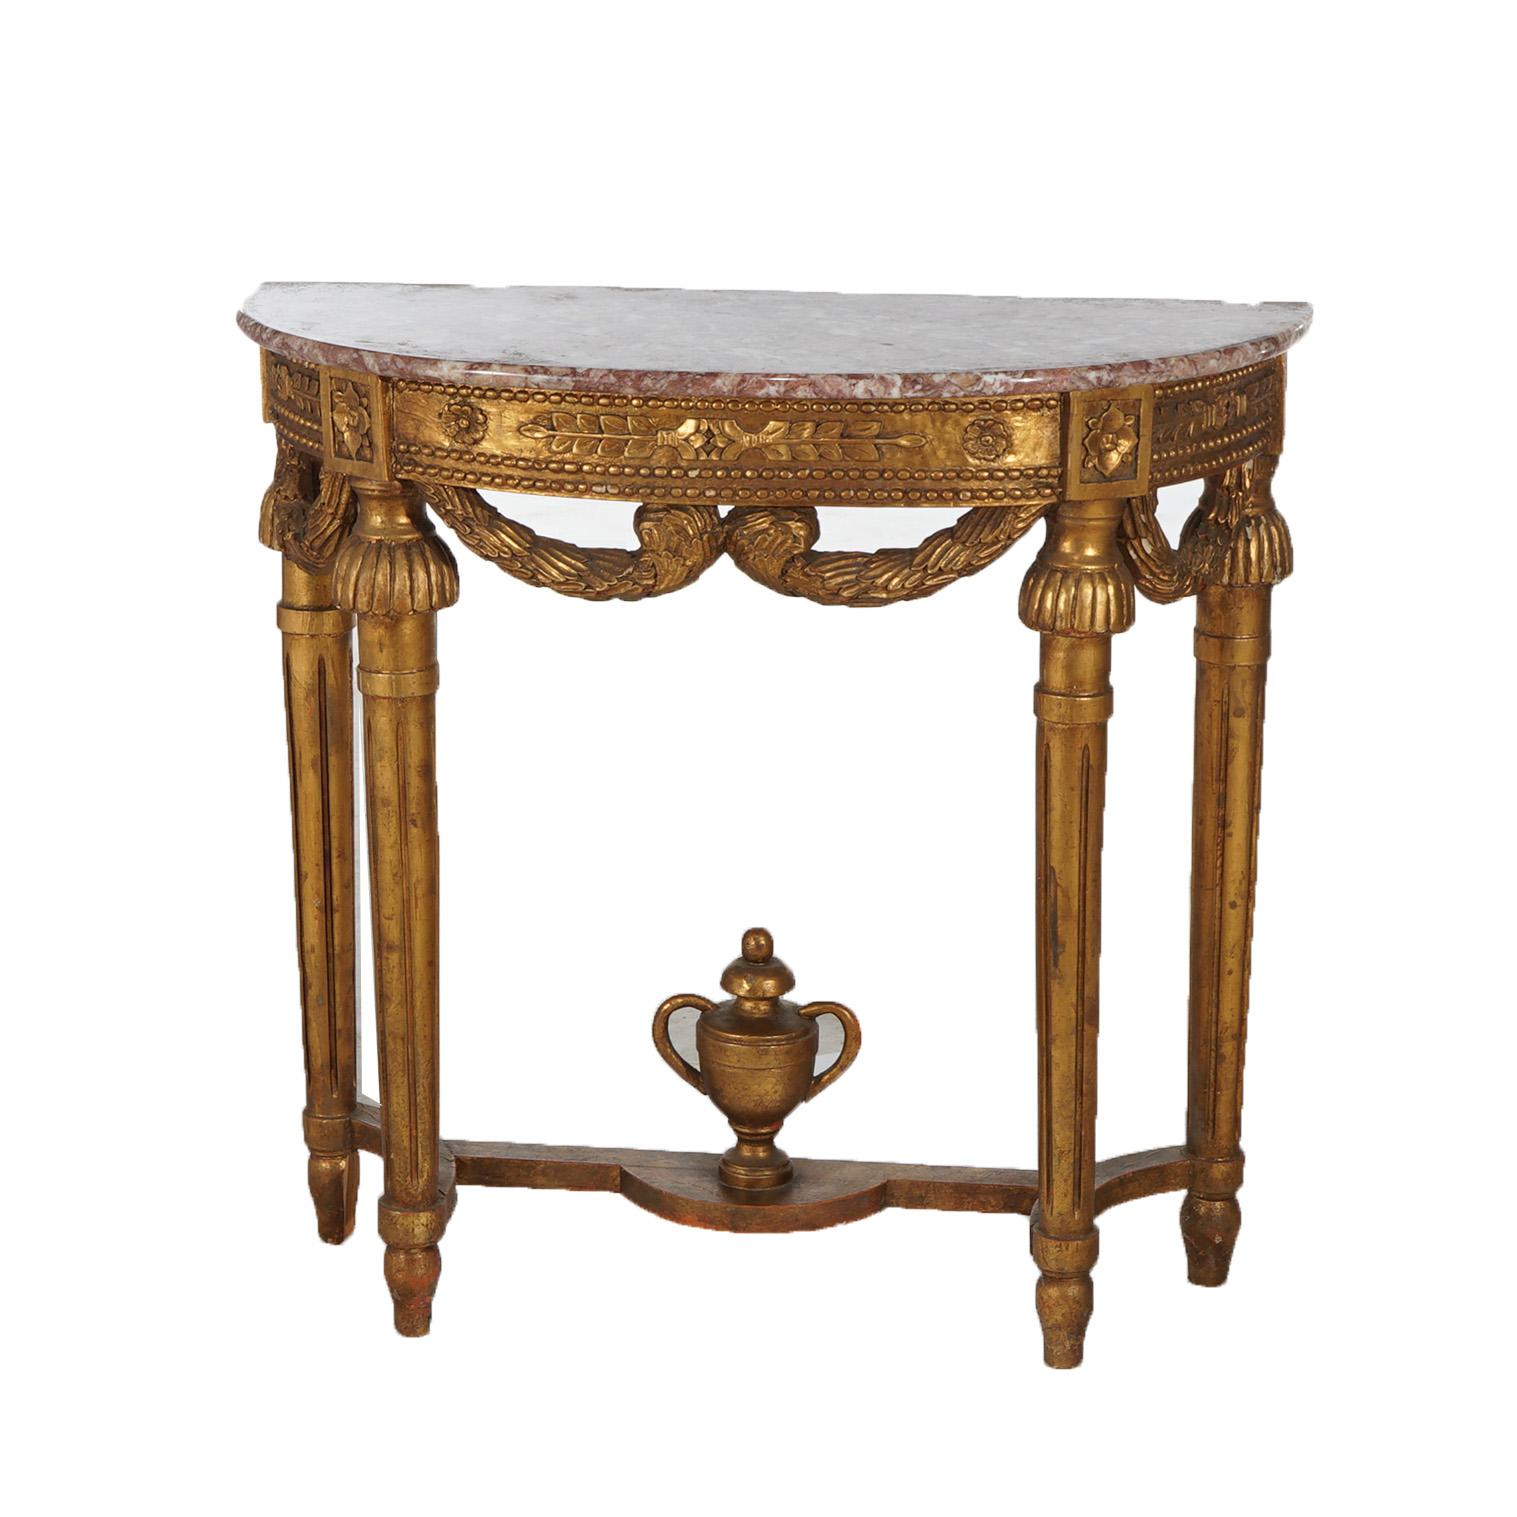 20th Century French Louis XVI Style Carved Giltwood & Marble Demilune Console Table, 20thC